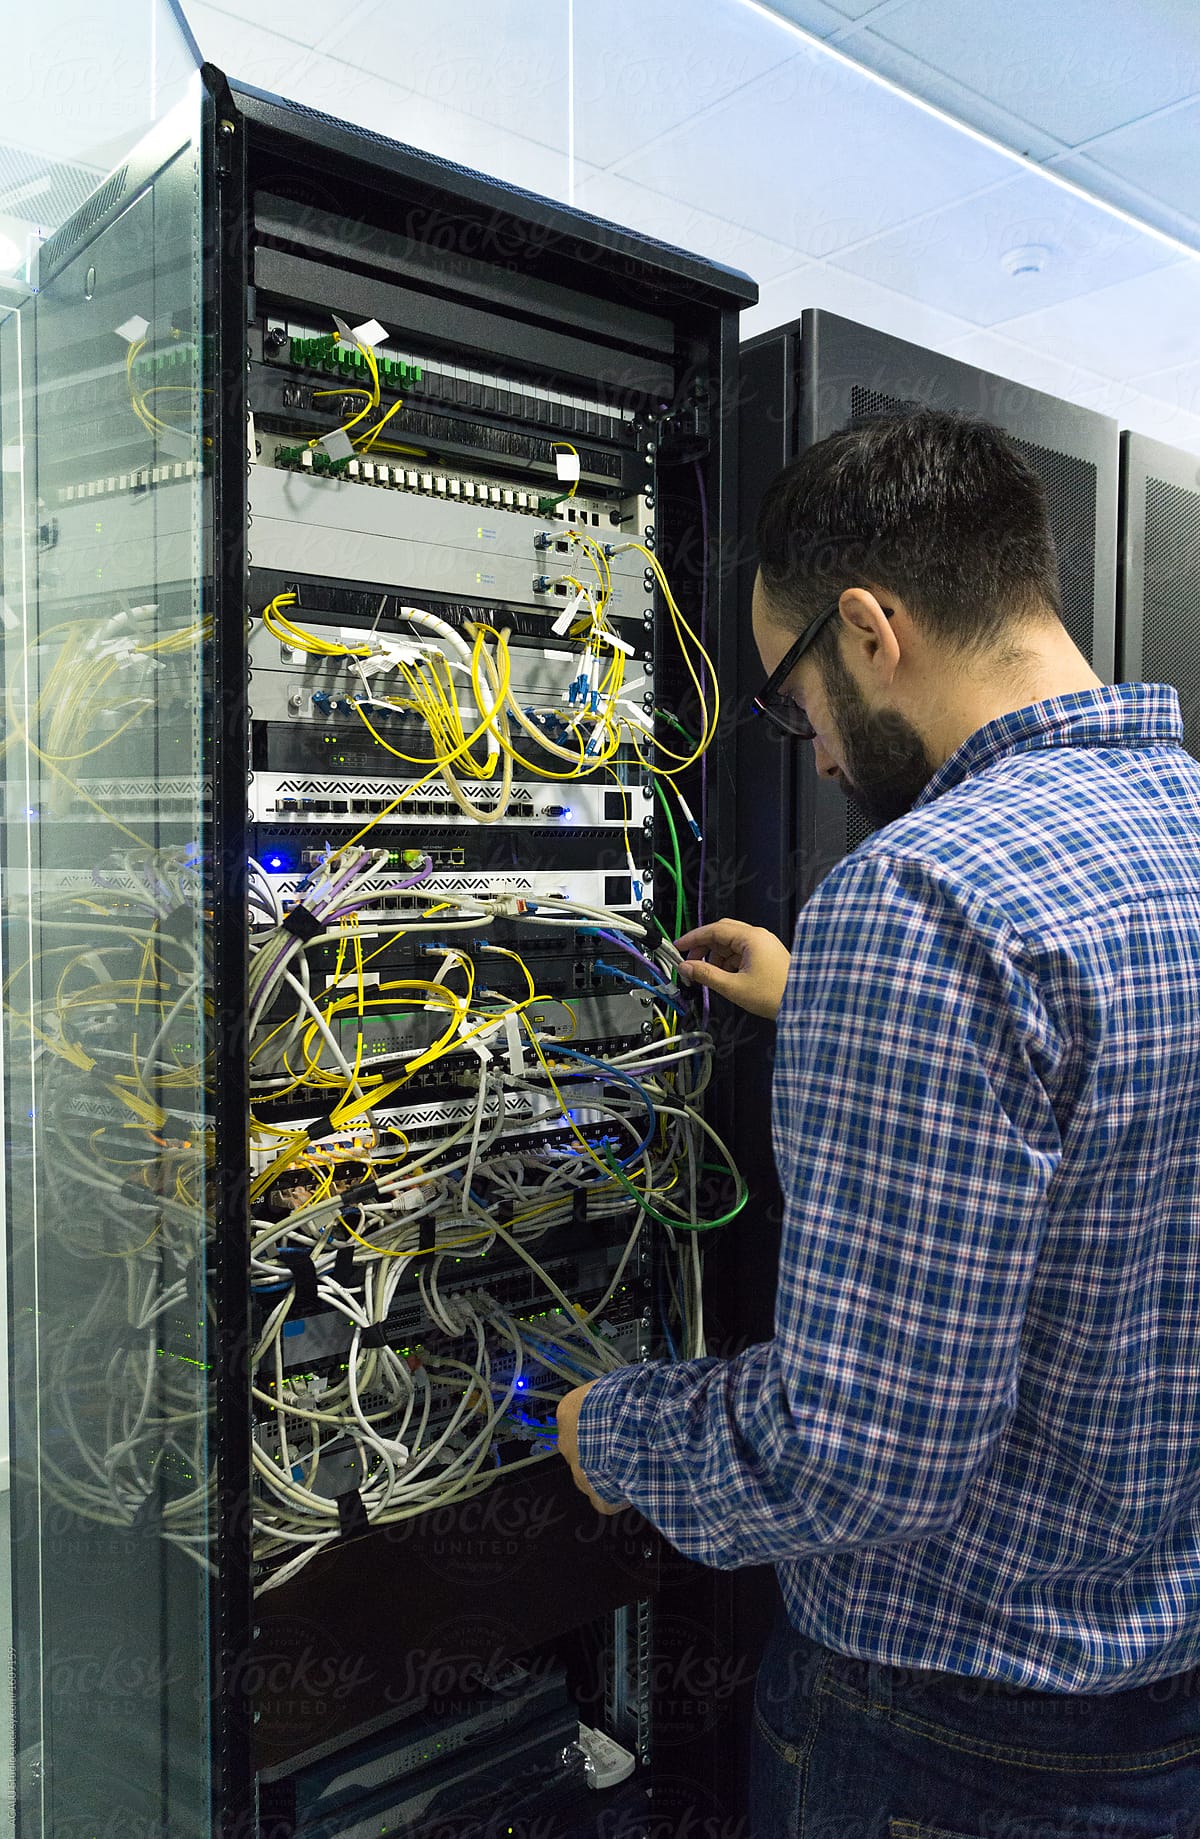 Technician performing maintenance tasks in a server of communica